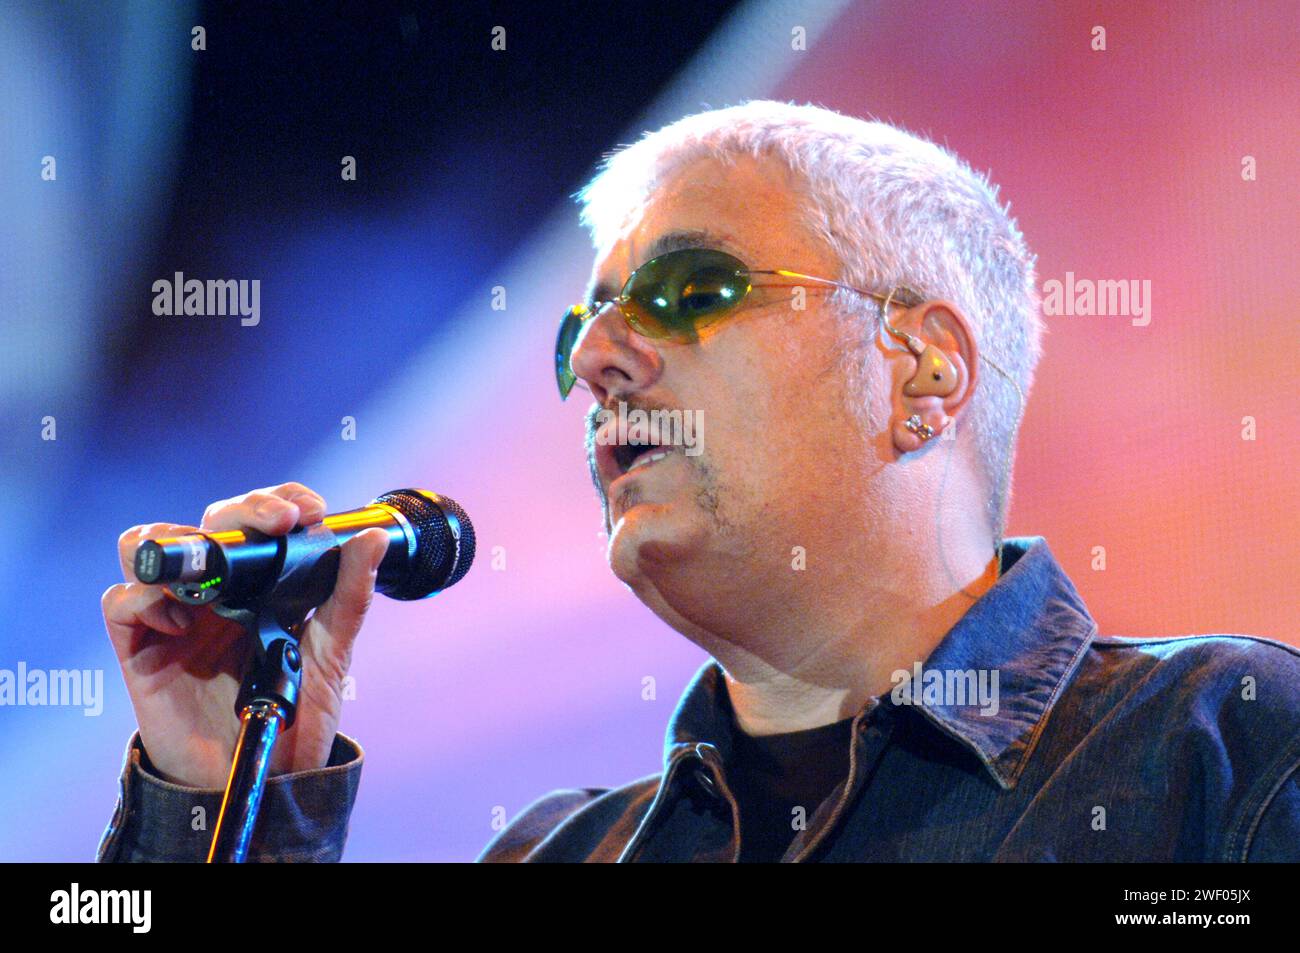 Napoli Italy 2006-06-01 : Pino Daniele in concert during the musical event 'Festivalbar 2007' Stock Photo